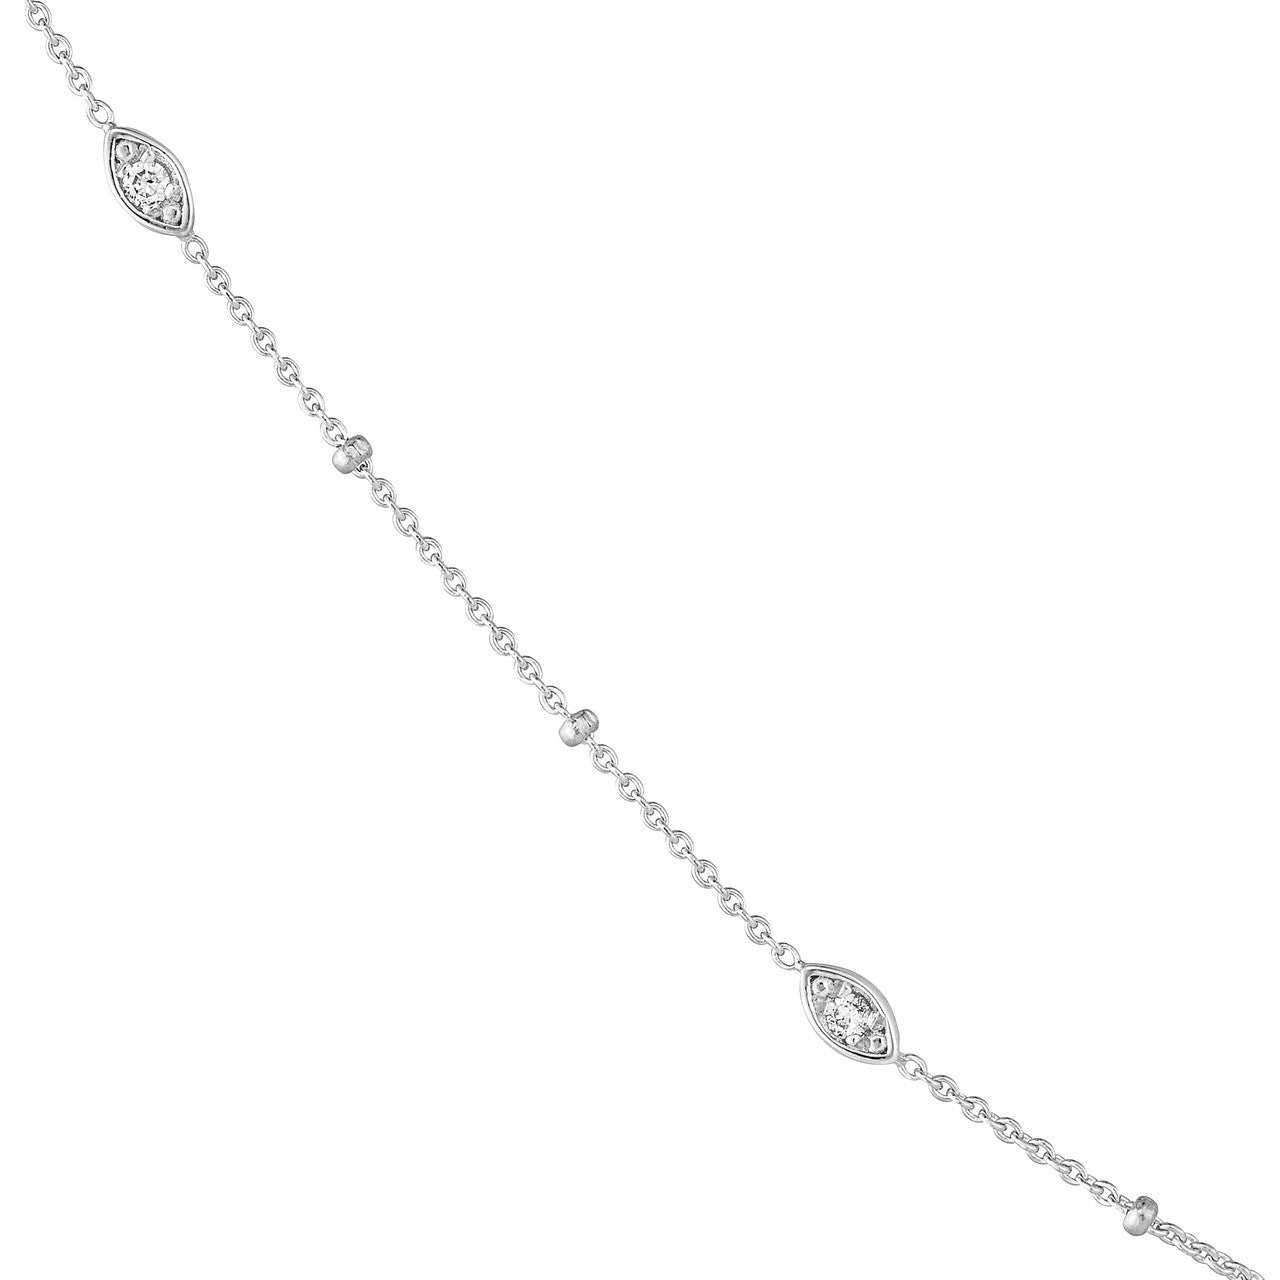 Diamond Marquise Bezels and Beads Necklace